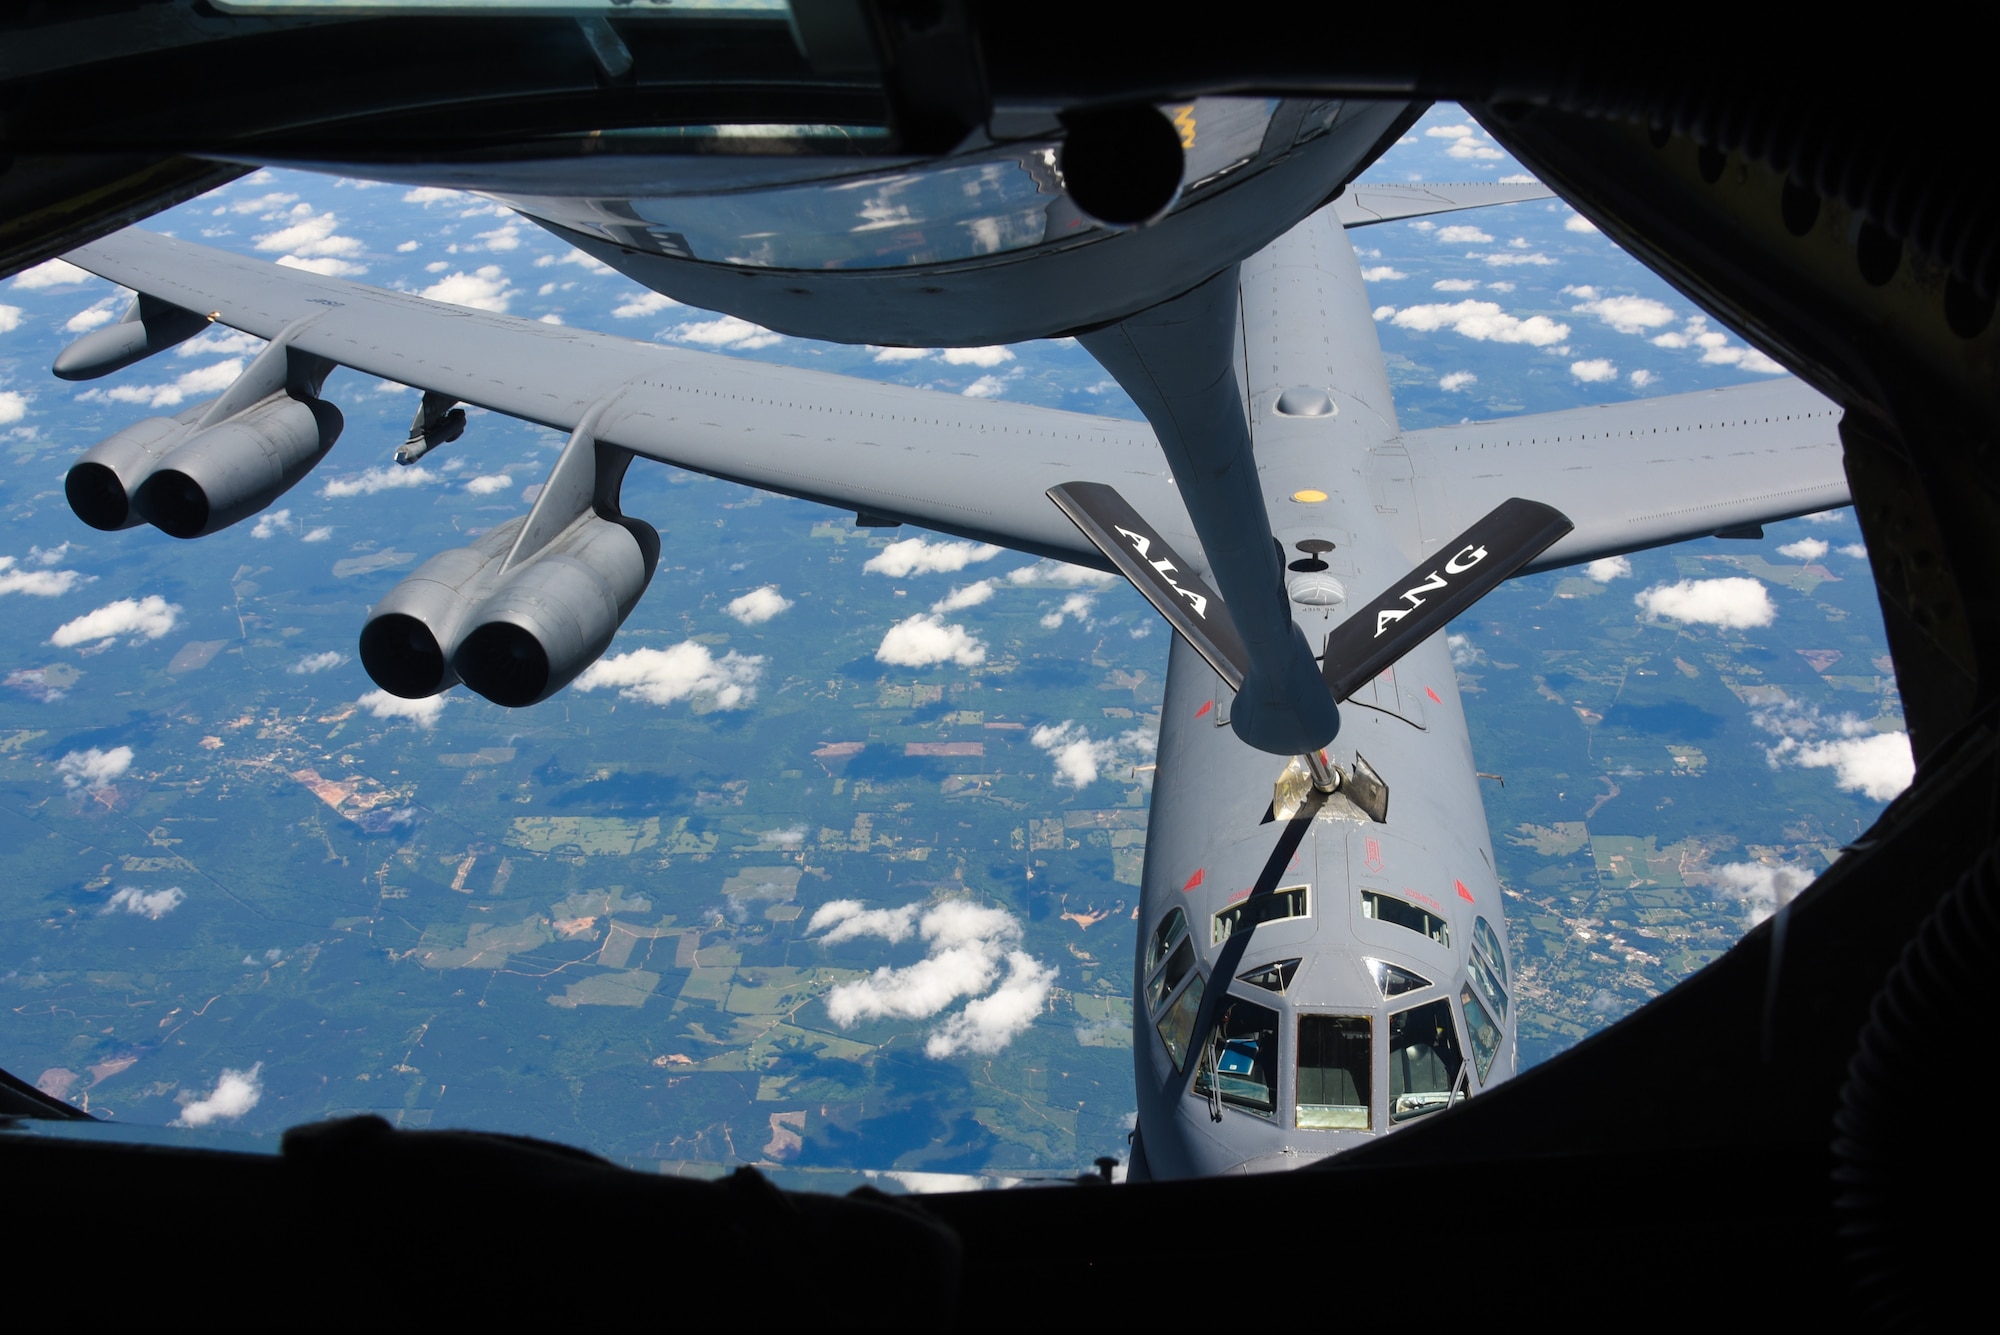 A U.S. Air Force B-52 is refueled by a U.S. Air Force KC-135 assigned to the 117th Air Refueling Wing, Alabama Air National Guard, located in Birmingham, Alabama on April 28, 2023. (U.S. Air National Guard photo by Staff Sgt. Nicholas Faddis.)